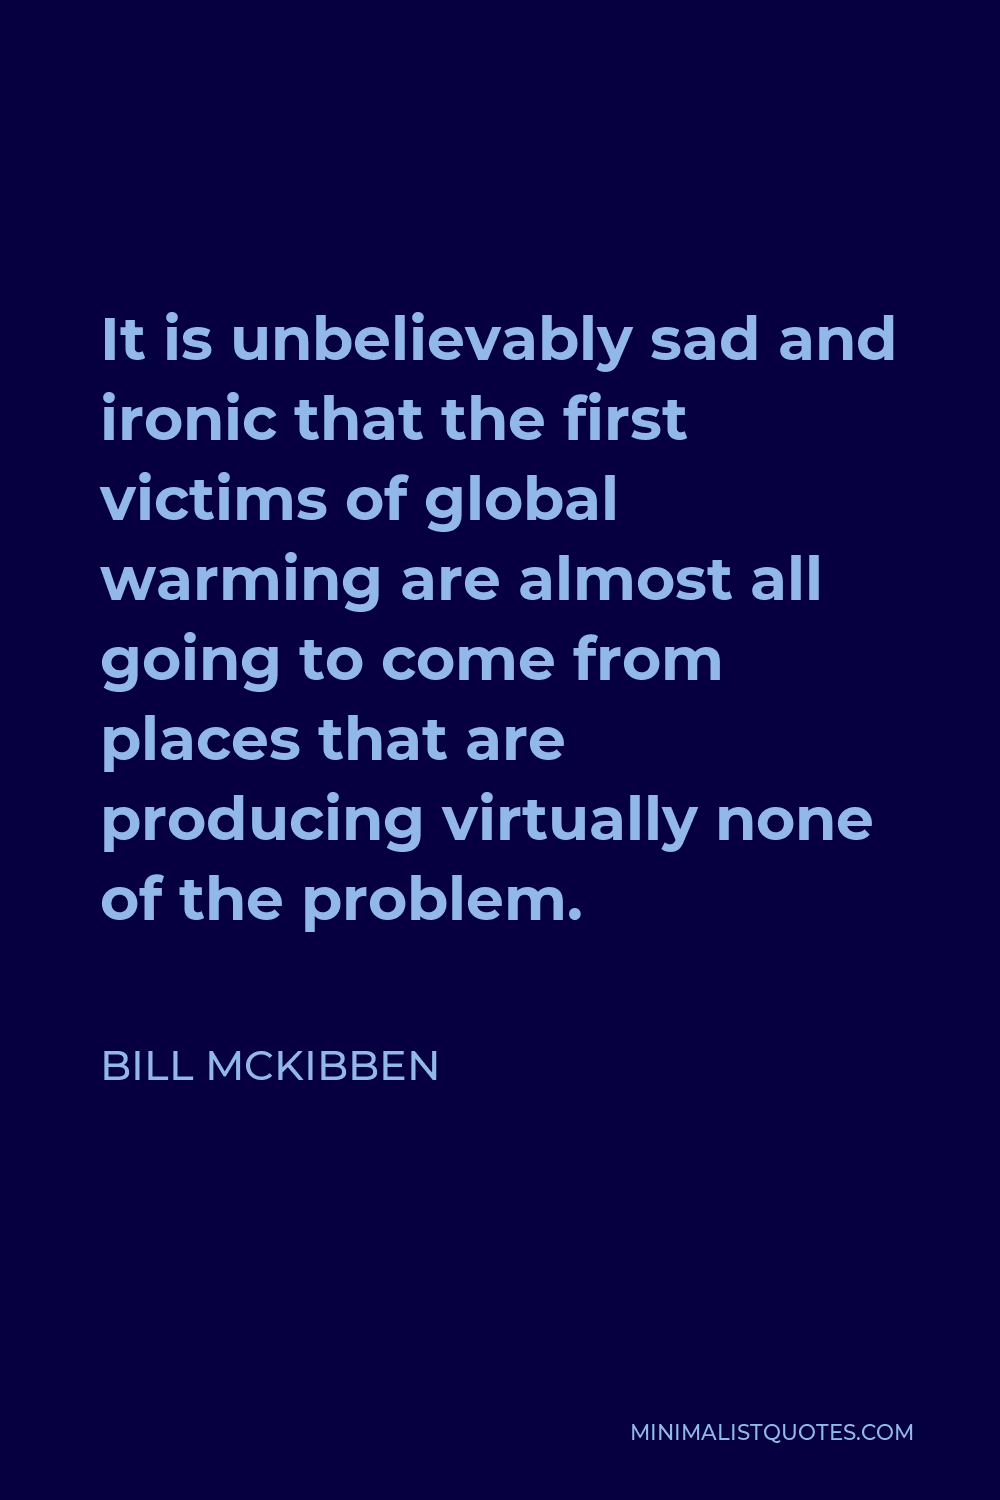 Bill McKibben Quote - It is unbelievably sad and ironic that the first victims of global warming are almost all going to come from places that are producing virtually none of the problem.